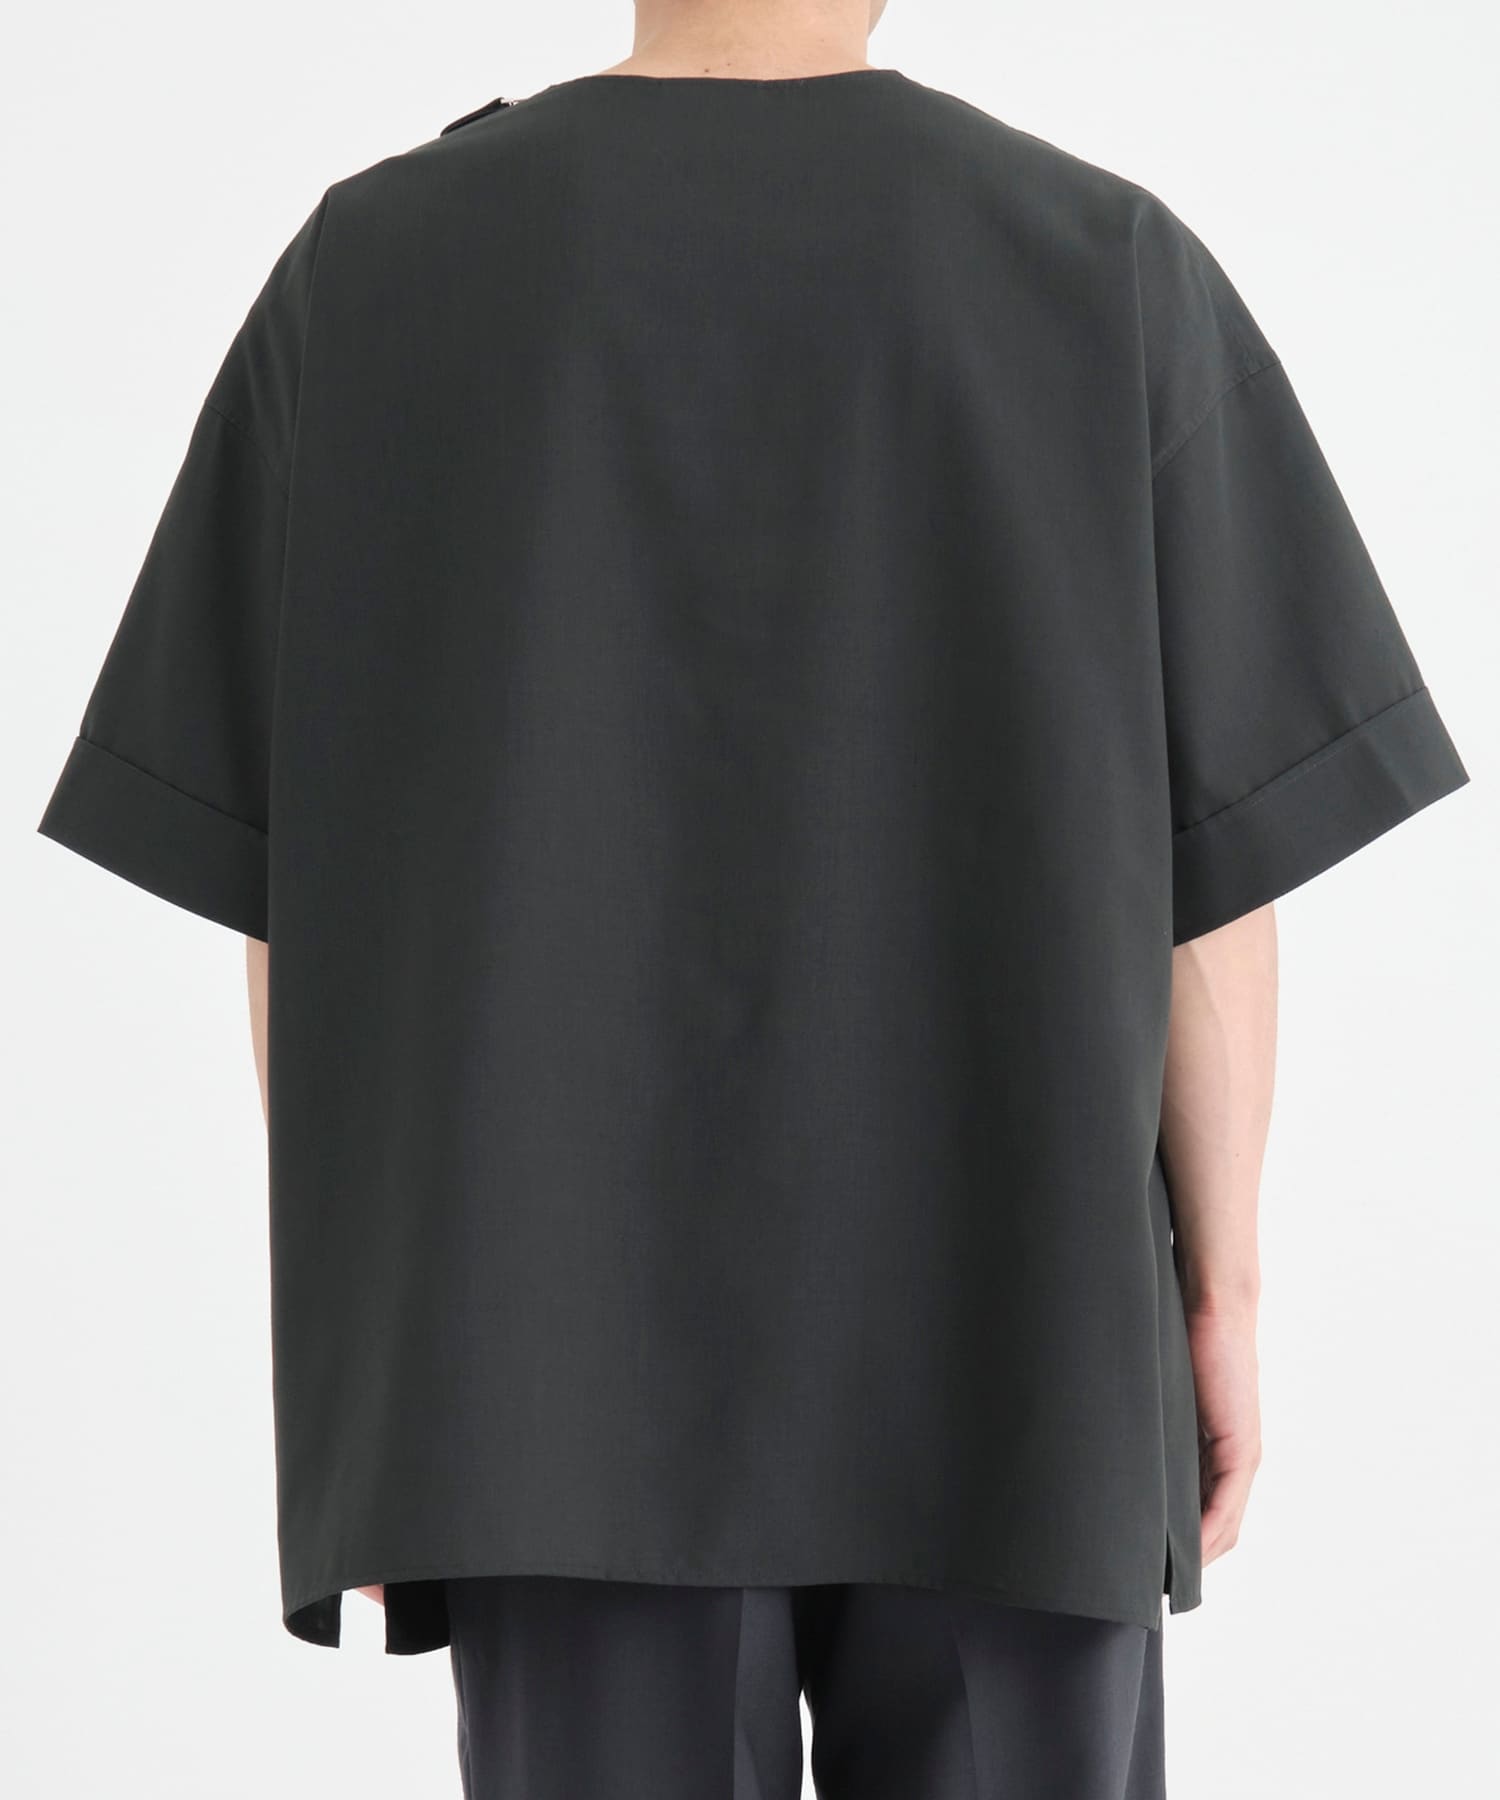 THE SIDE ZIP PO SHIRT S/S THE RERACS